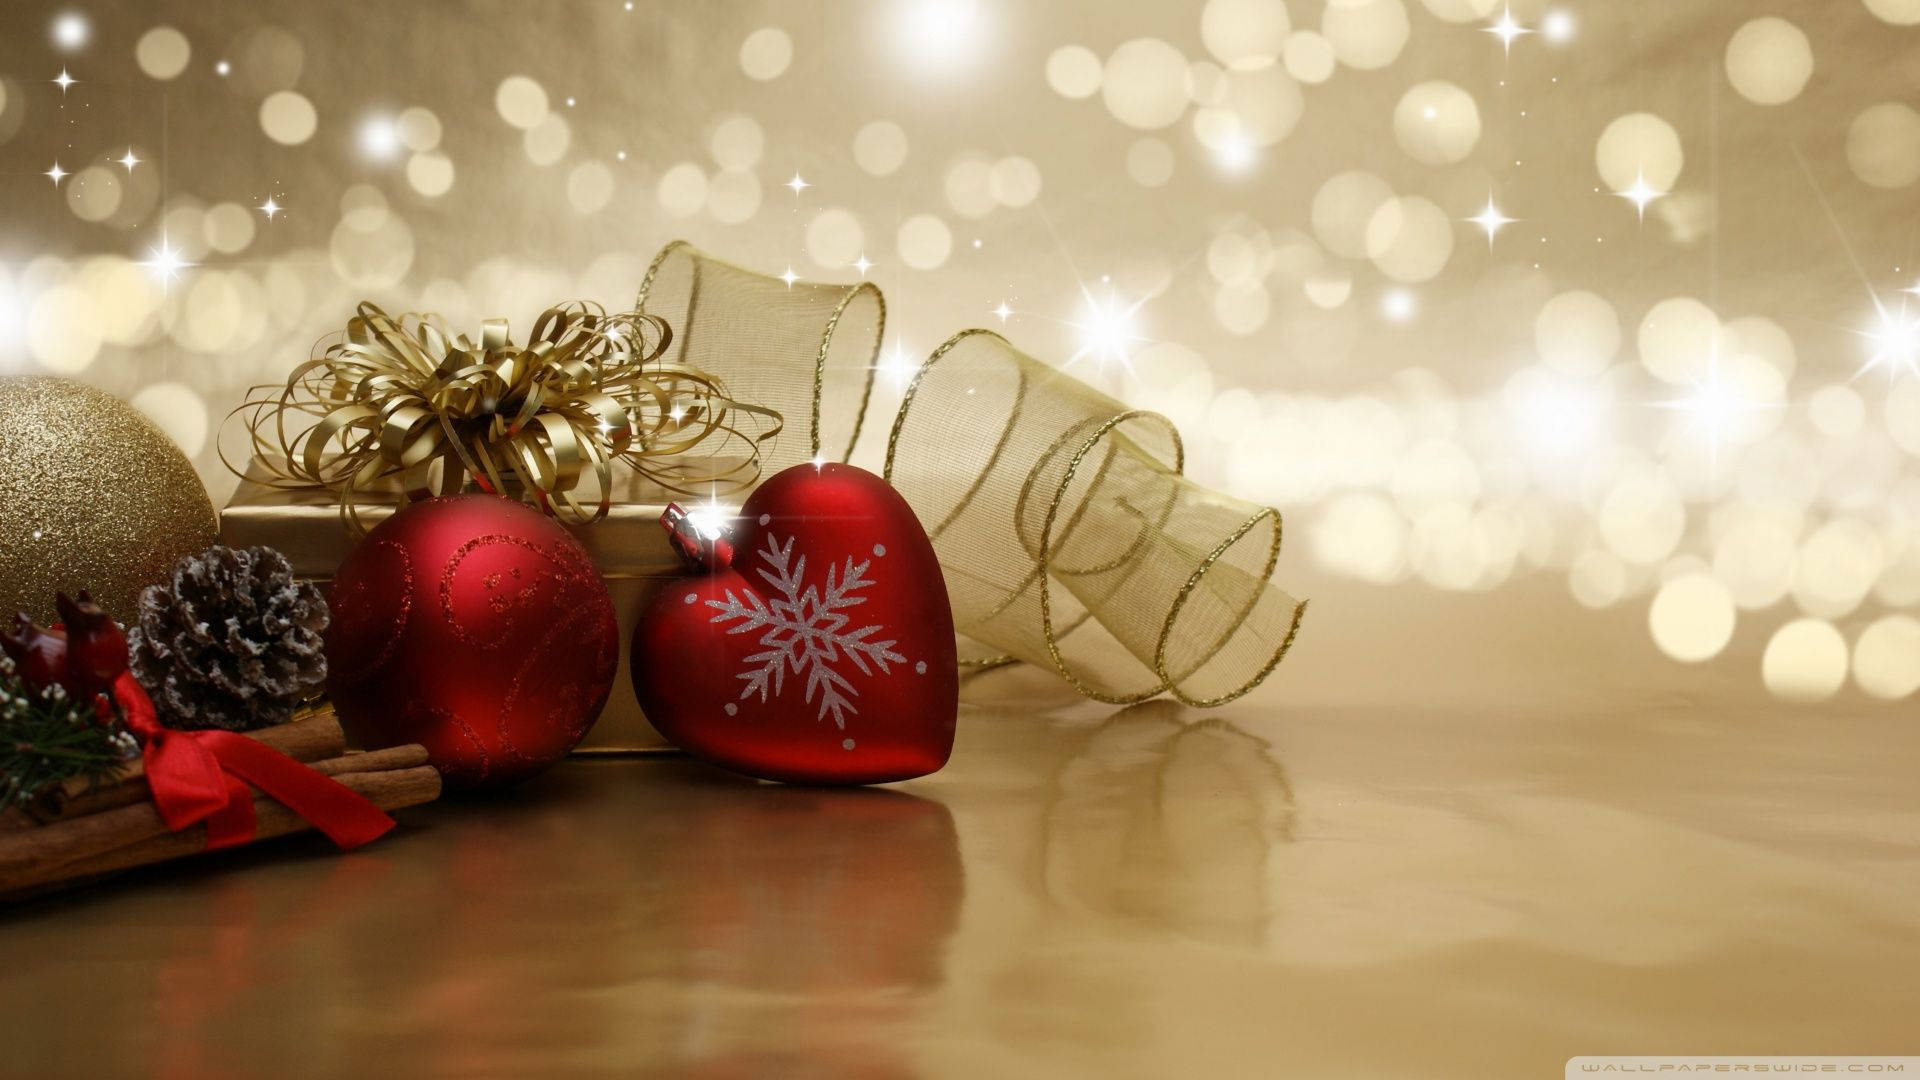 Free Christmas Wallpaper Downloads, [900+] Christmas Wallpapers for FREE |  